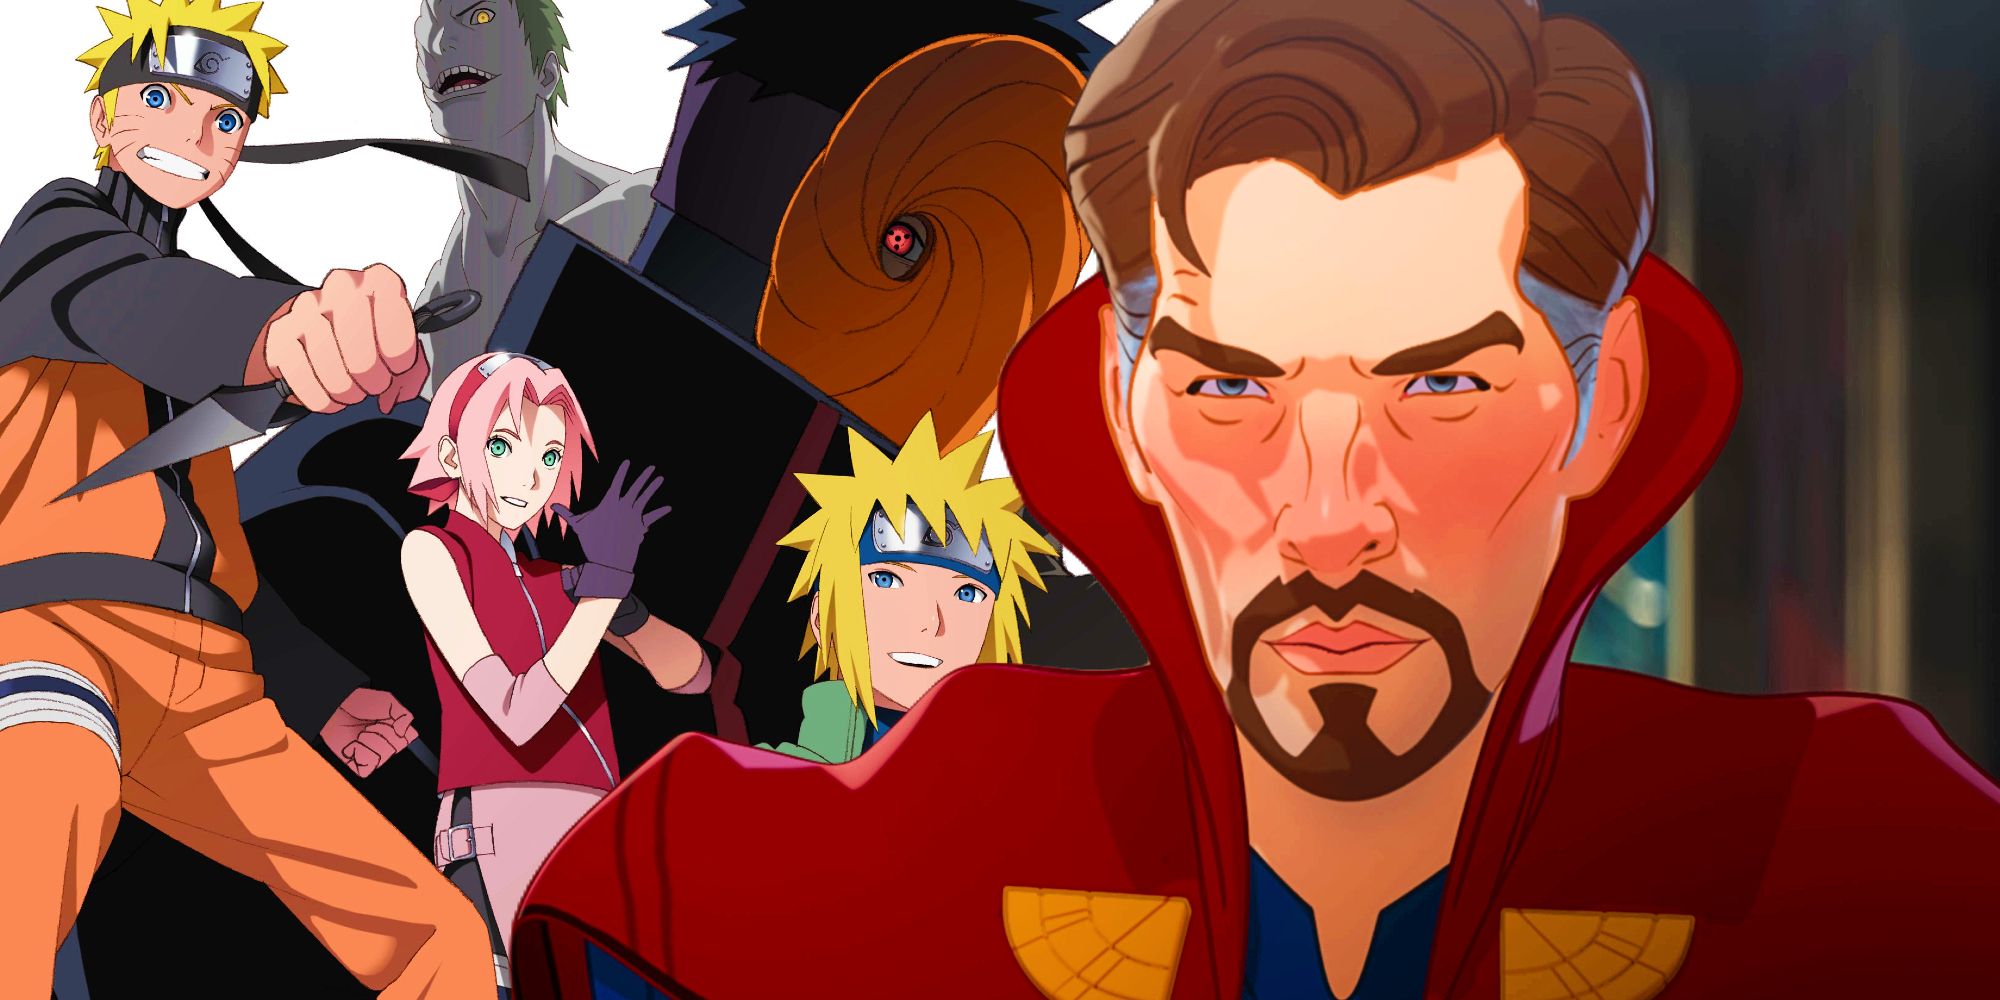 The Naruto characters and Doctor Strange